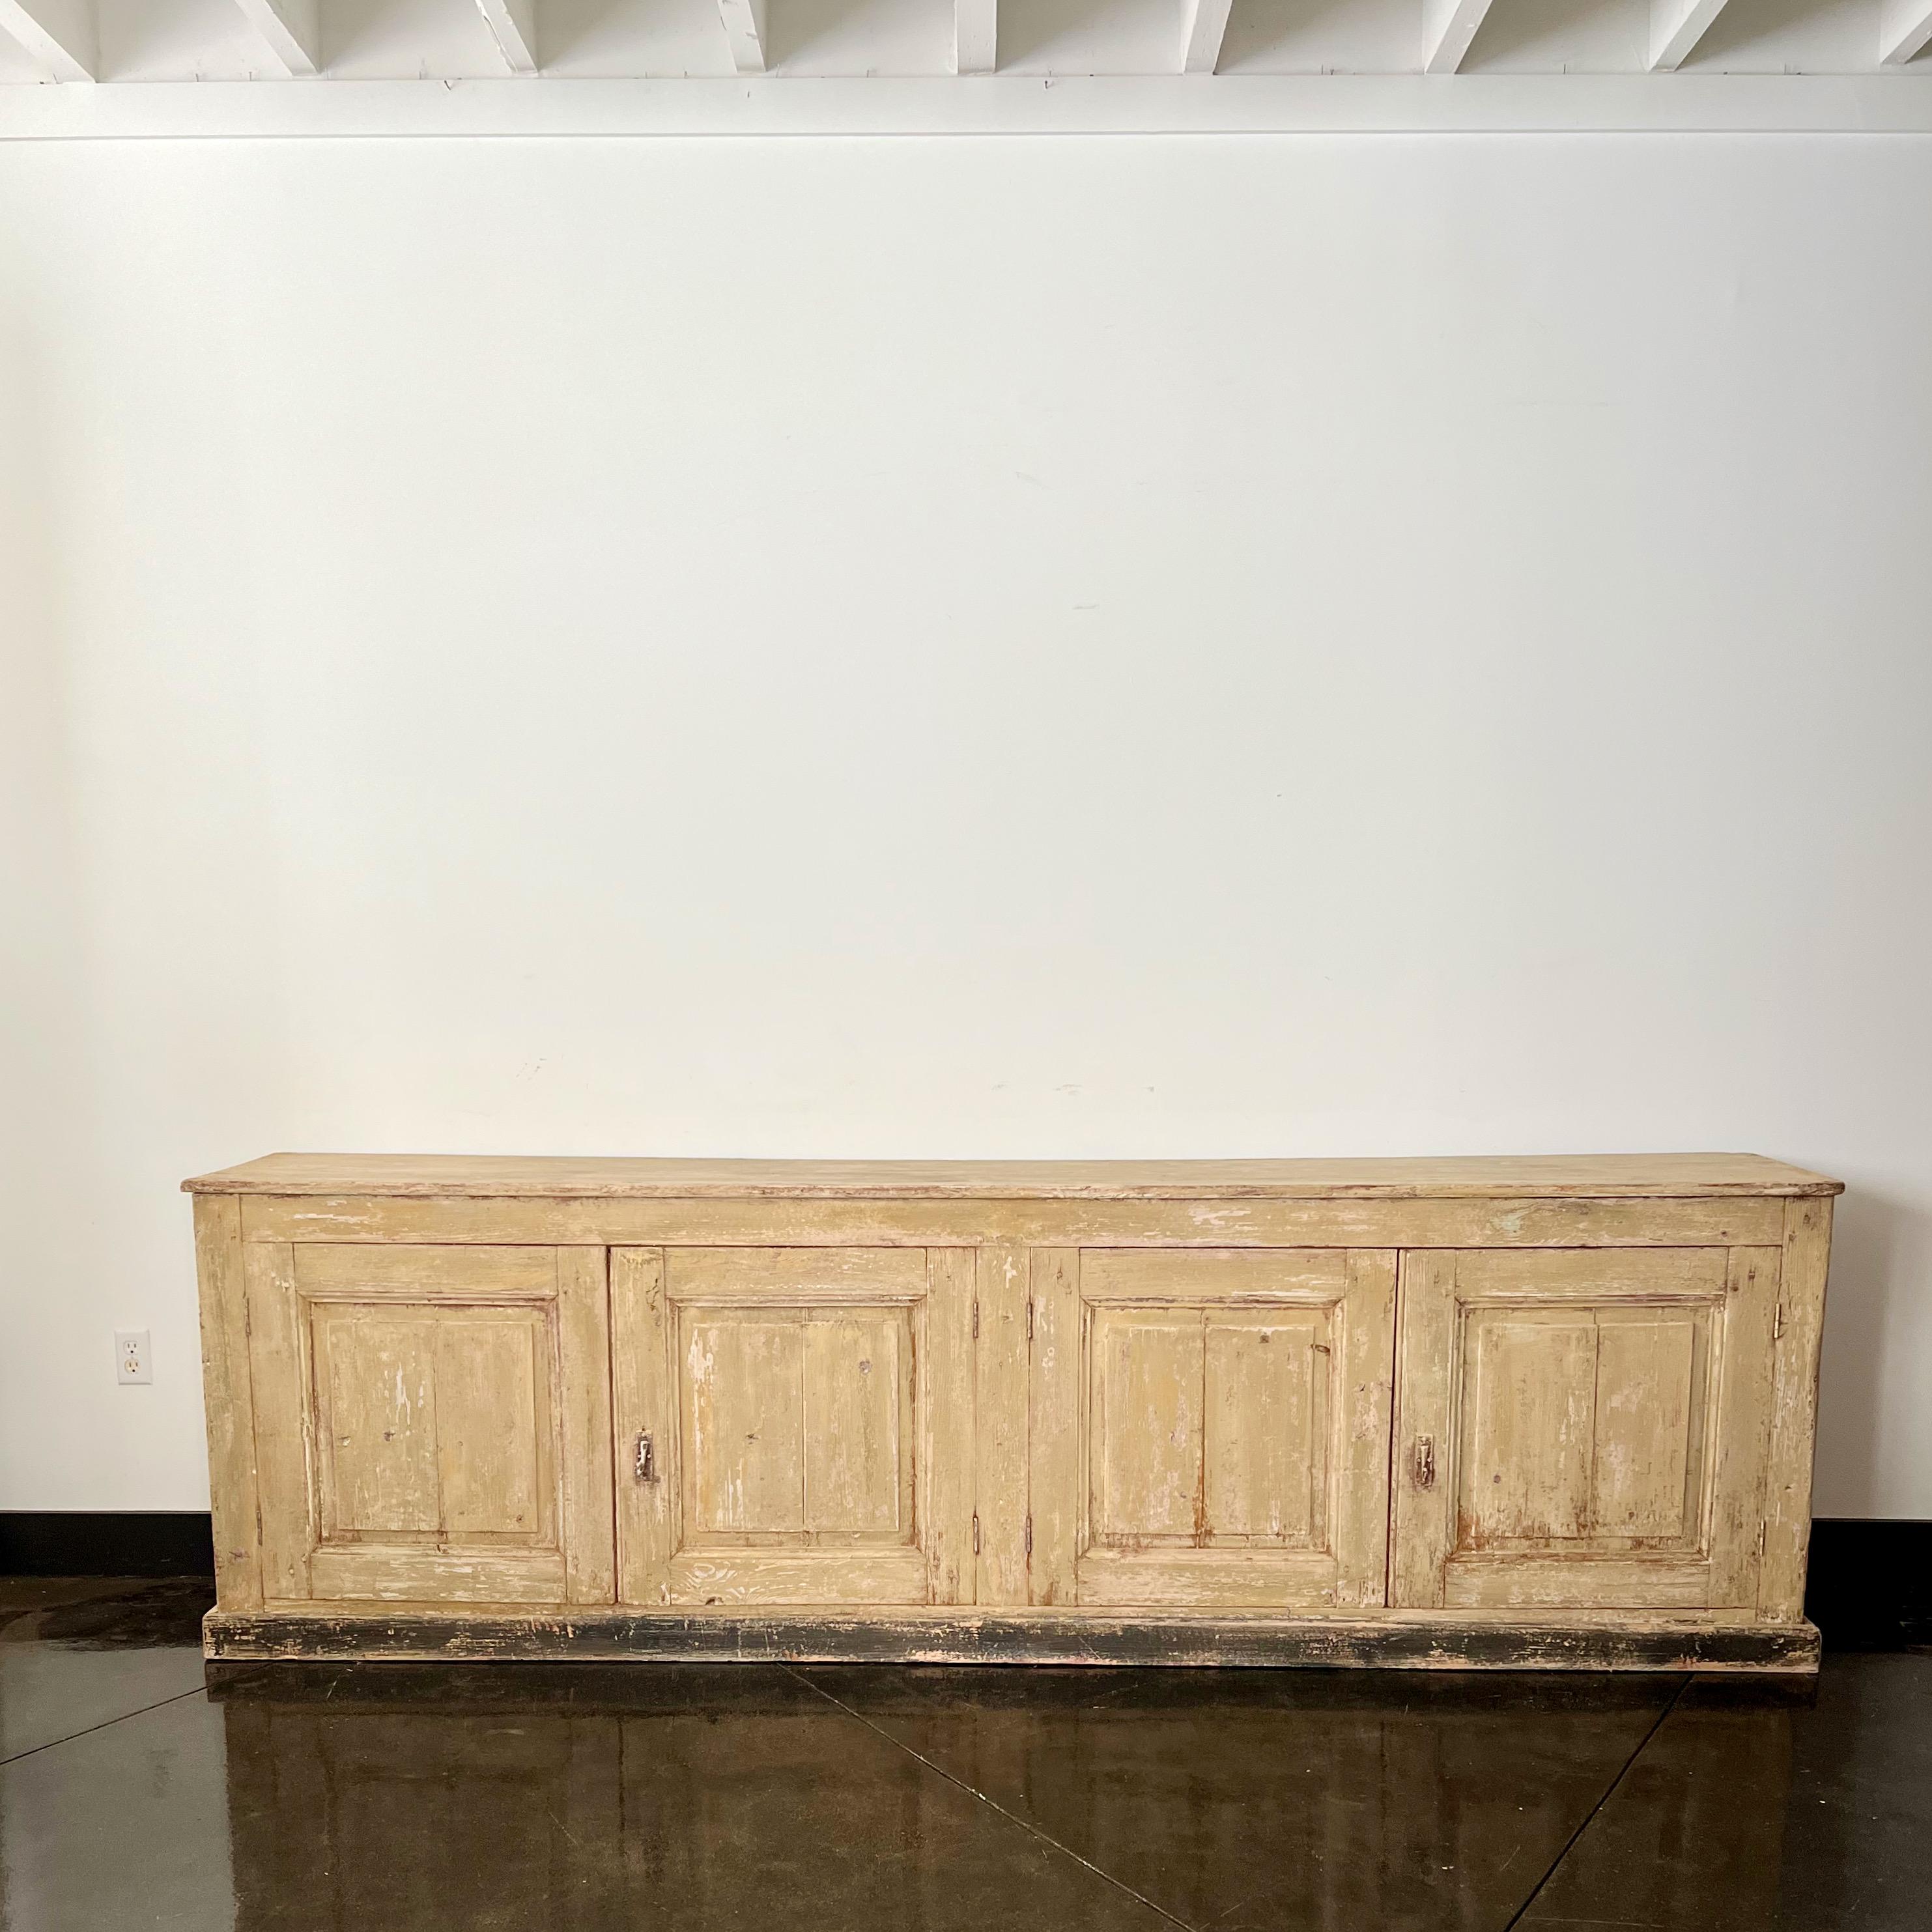 A very large four door 19th century Italian sideboard in original lot of time worn patina with amble storage and original hardwares.
